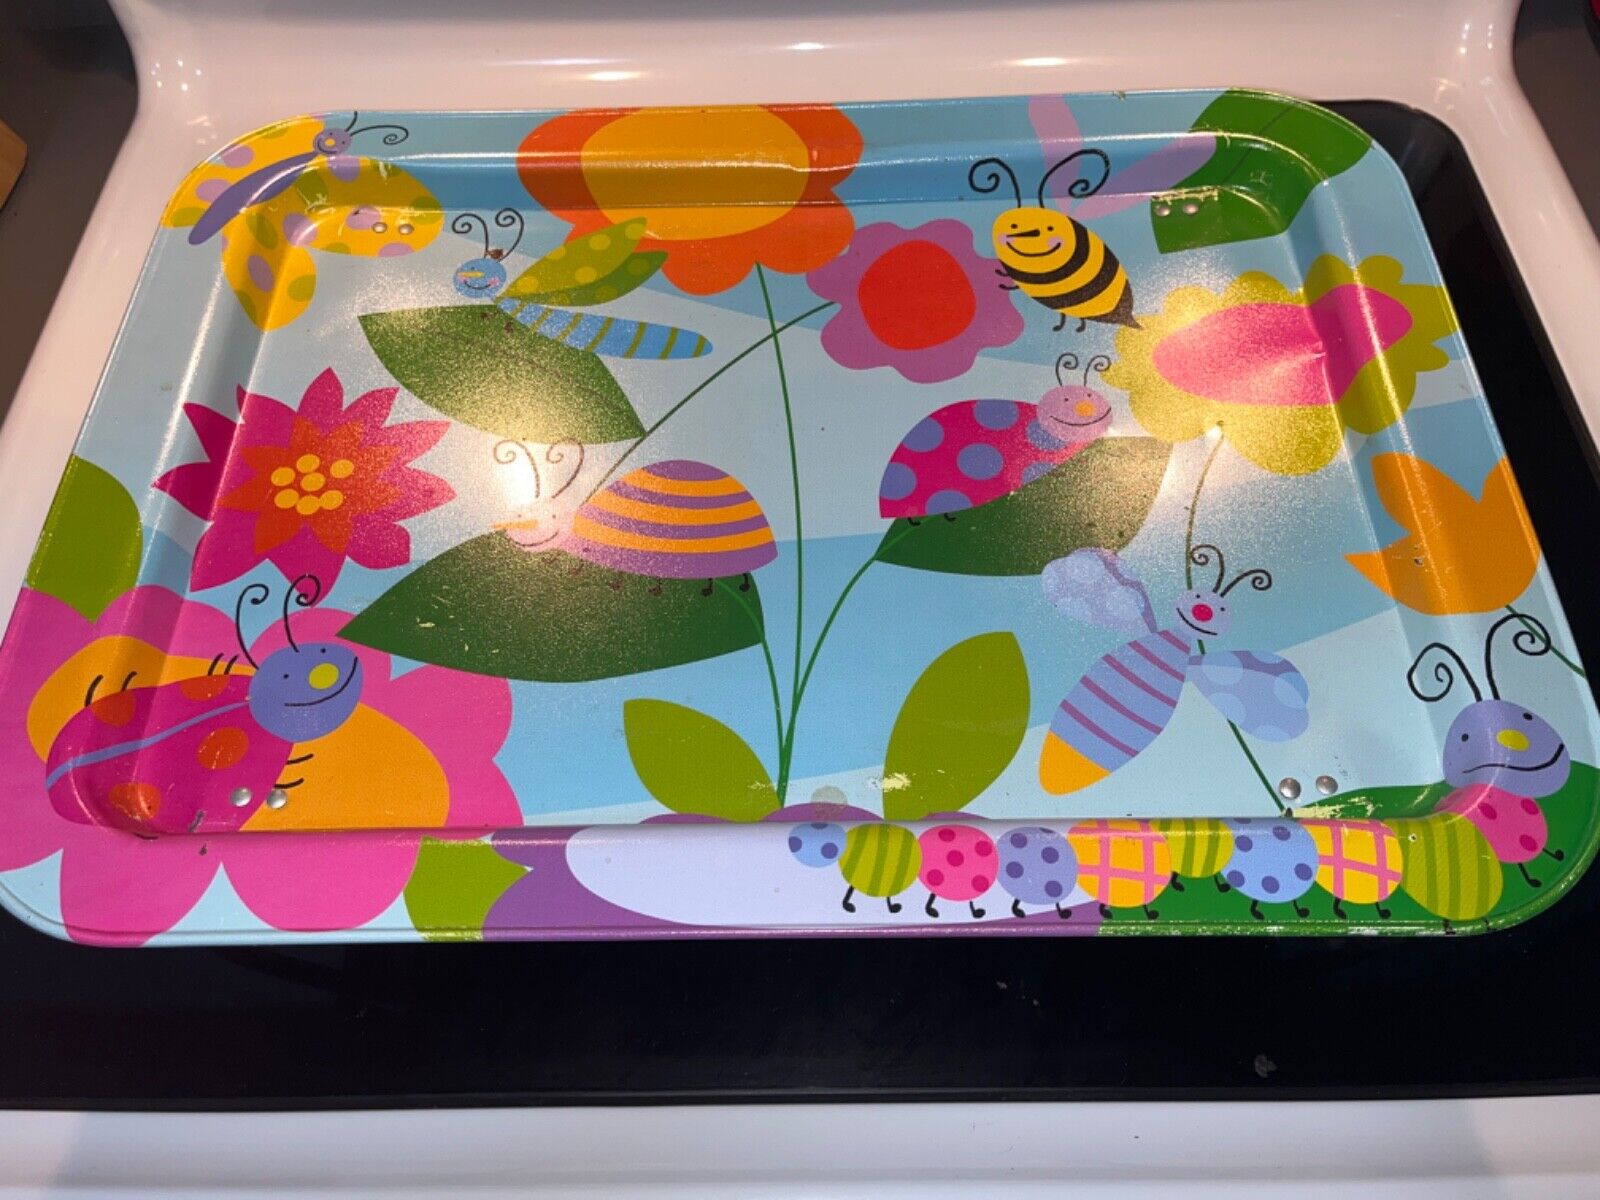 1980s-1990s, vintage, child kid family friendly, metal tv tray, used 